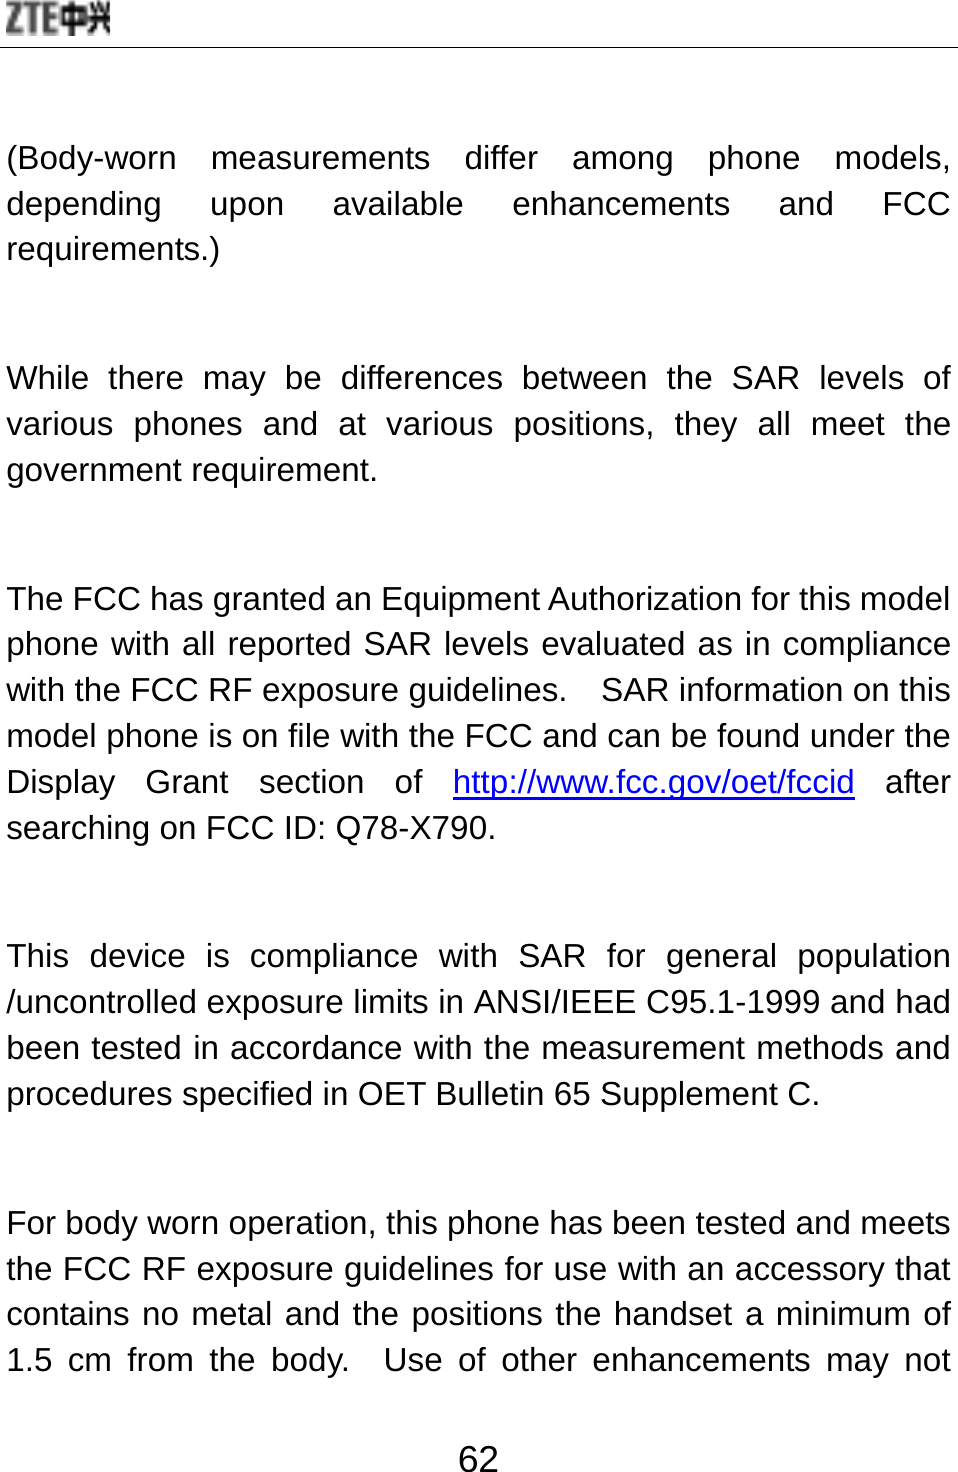  62 (Body-worn measurements differ among phone models, depending upon available enhancements and FCC requirements.)  While there may be differences between the SAR levels of various phones and at various positions, they all meet the government requirement.  The FCC has granted an Equipment Authorization for this model phone with all reported SAR levels evaluated as in compliance with the FCC RF exposure guidelines.    SAR information on this model phone is on file with the FCC and can be found under the Display Grant section of http://www.fcc.gov/oet/fccid after searching on FCC ID: Q78-X790.  This device is compliance with SAR for general population /uncontrolled exposure limits in ANSI/IEEE C95.1-1999 and had been tested in accordance with the measurement methods and procedures specified in OET Bulletin 65 Supplement C.  For body worn operation, this phone has been tested and meets the FCC RF exposure guidelines for use with an accessory that contains no metal and the positions the handset a minimum of 1.5 cm from the body.  Use of other enhancements may not 